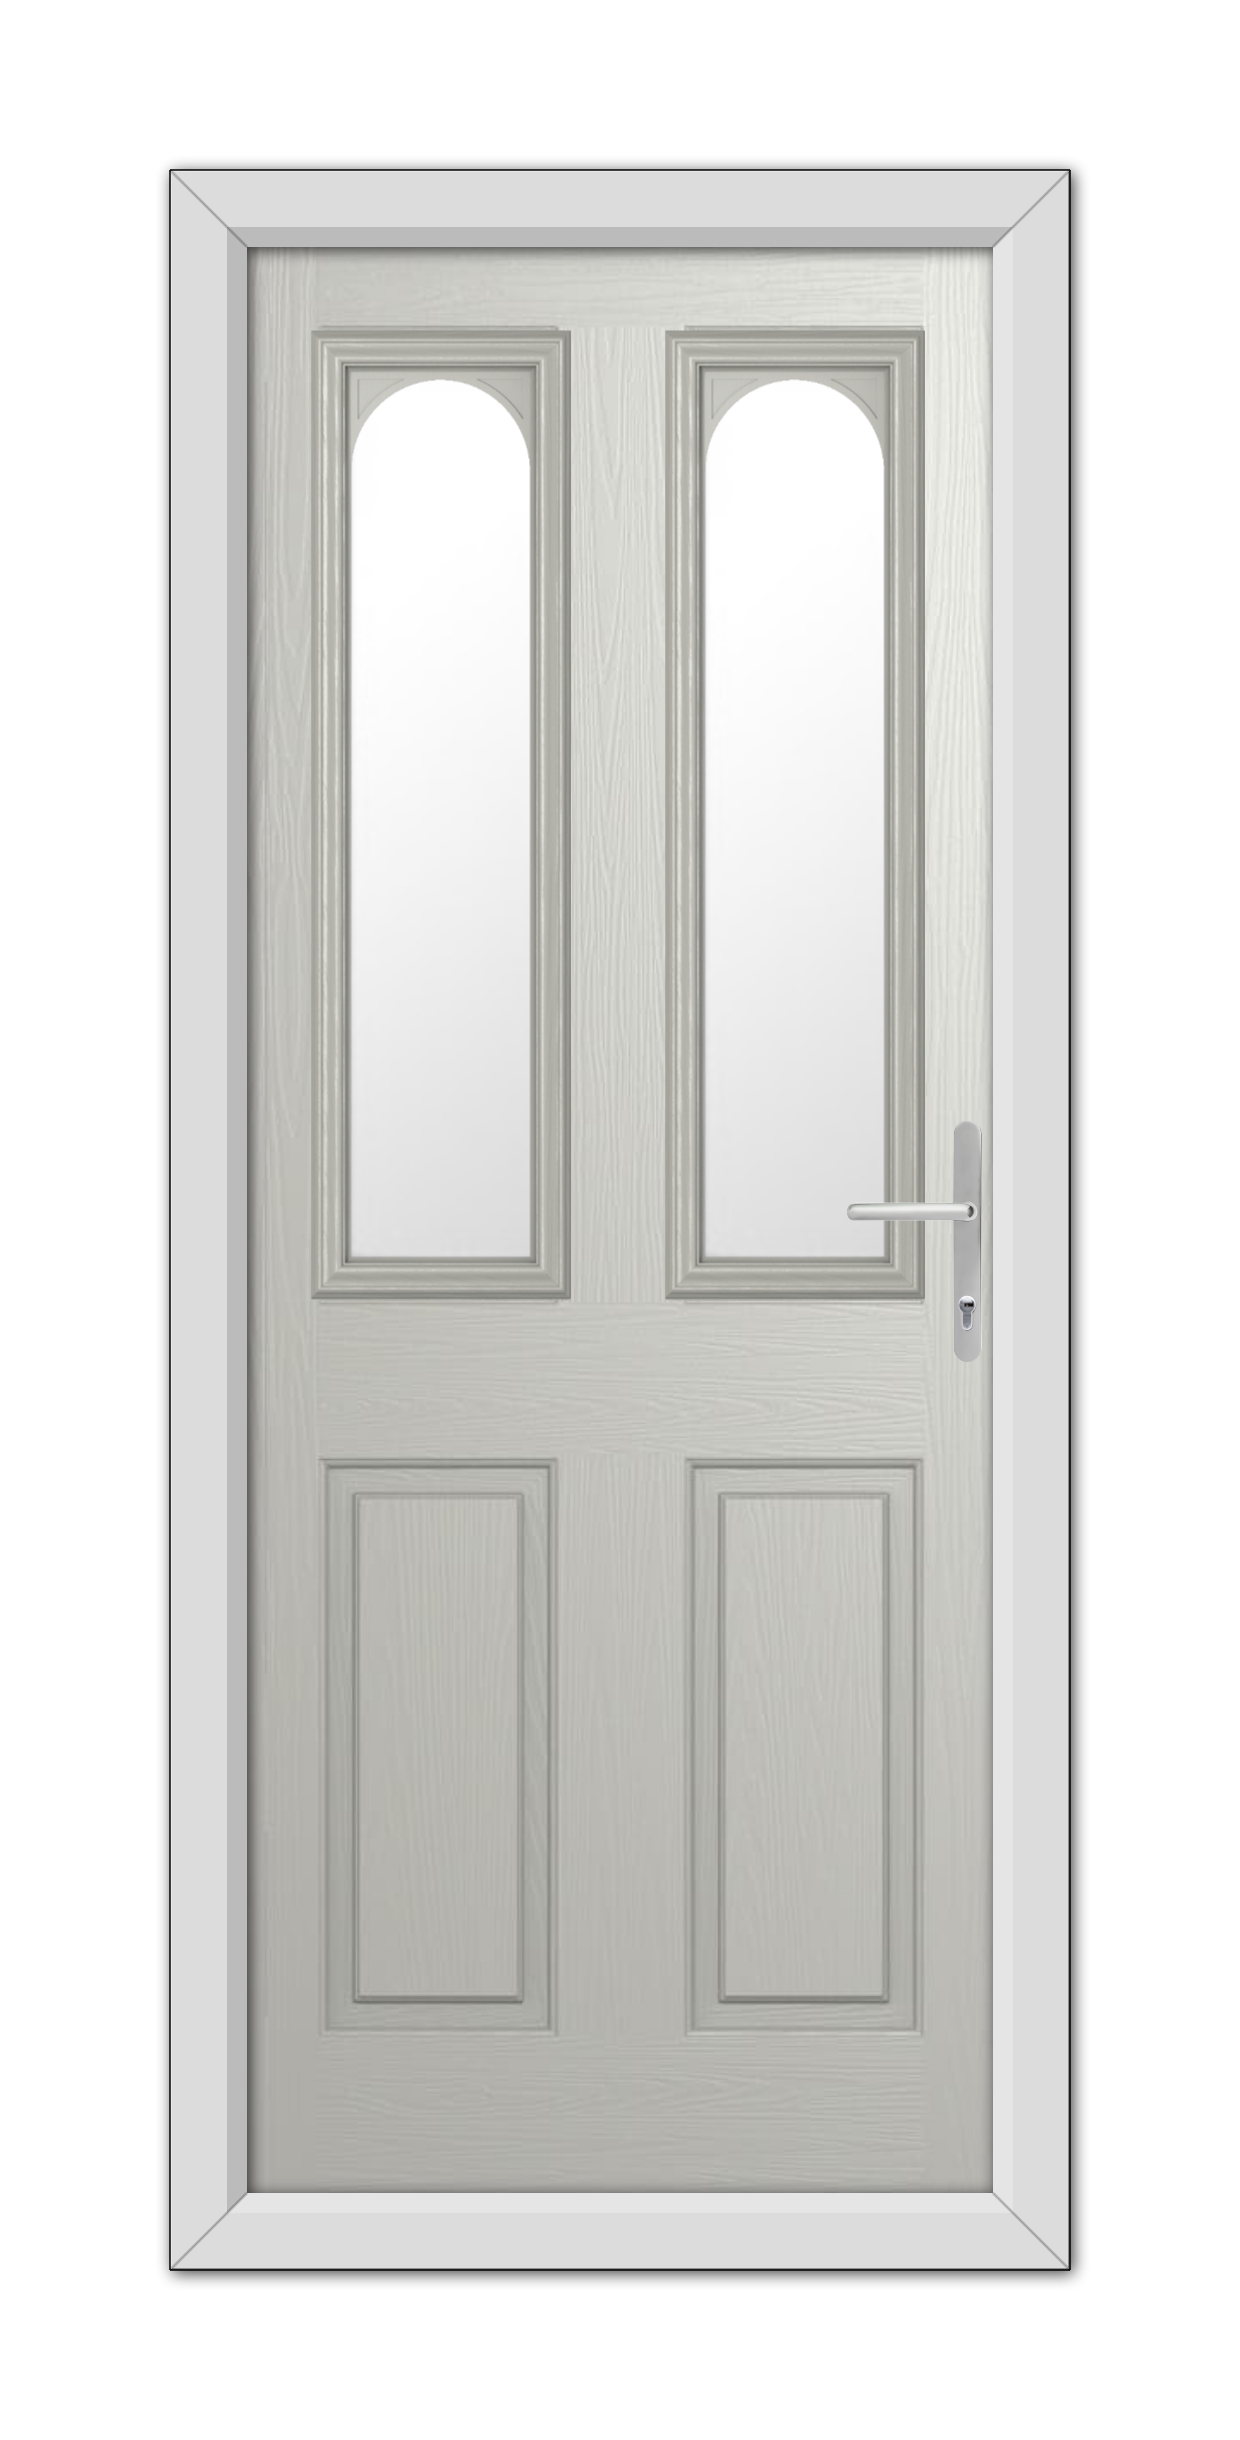 A modern Agate Grey Elmhurst Composite Door with upper glass panels and a metal handle on the right side, set in a simple frame.